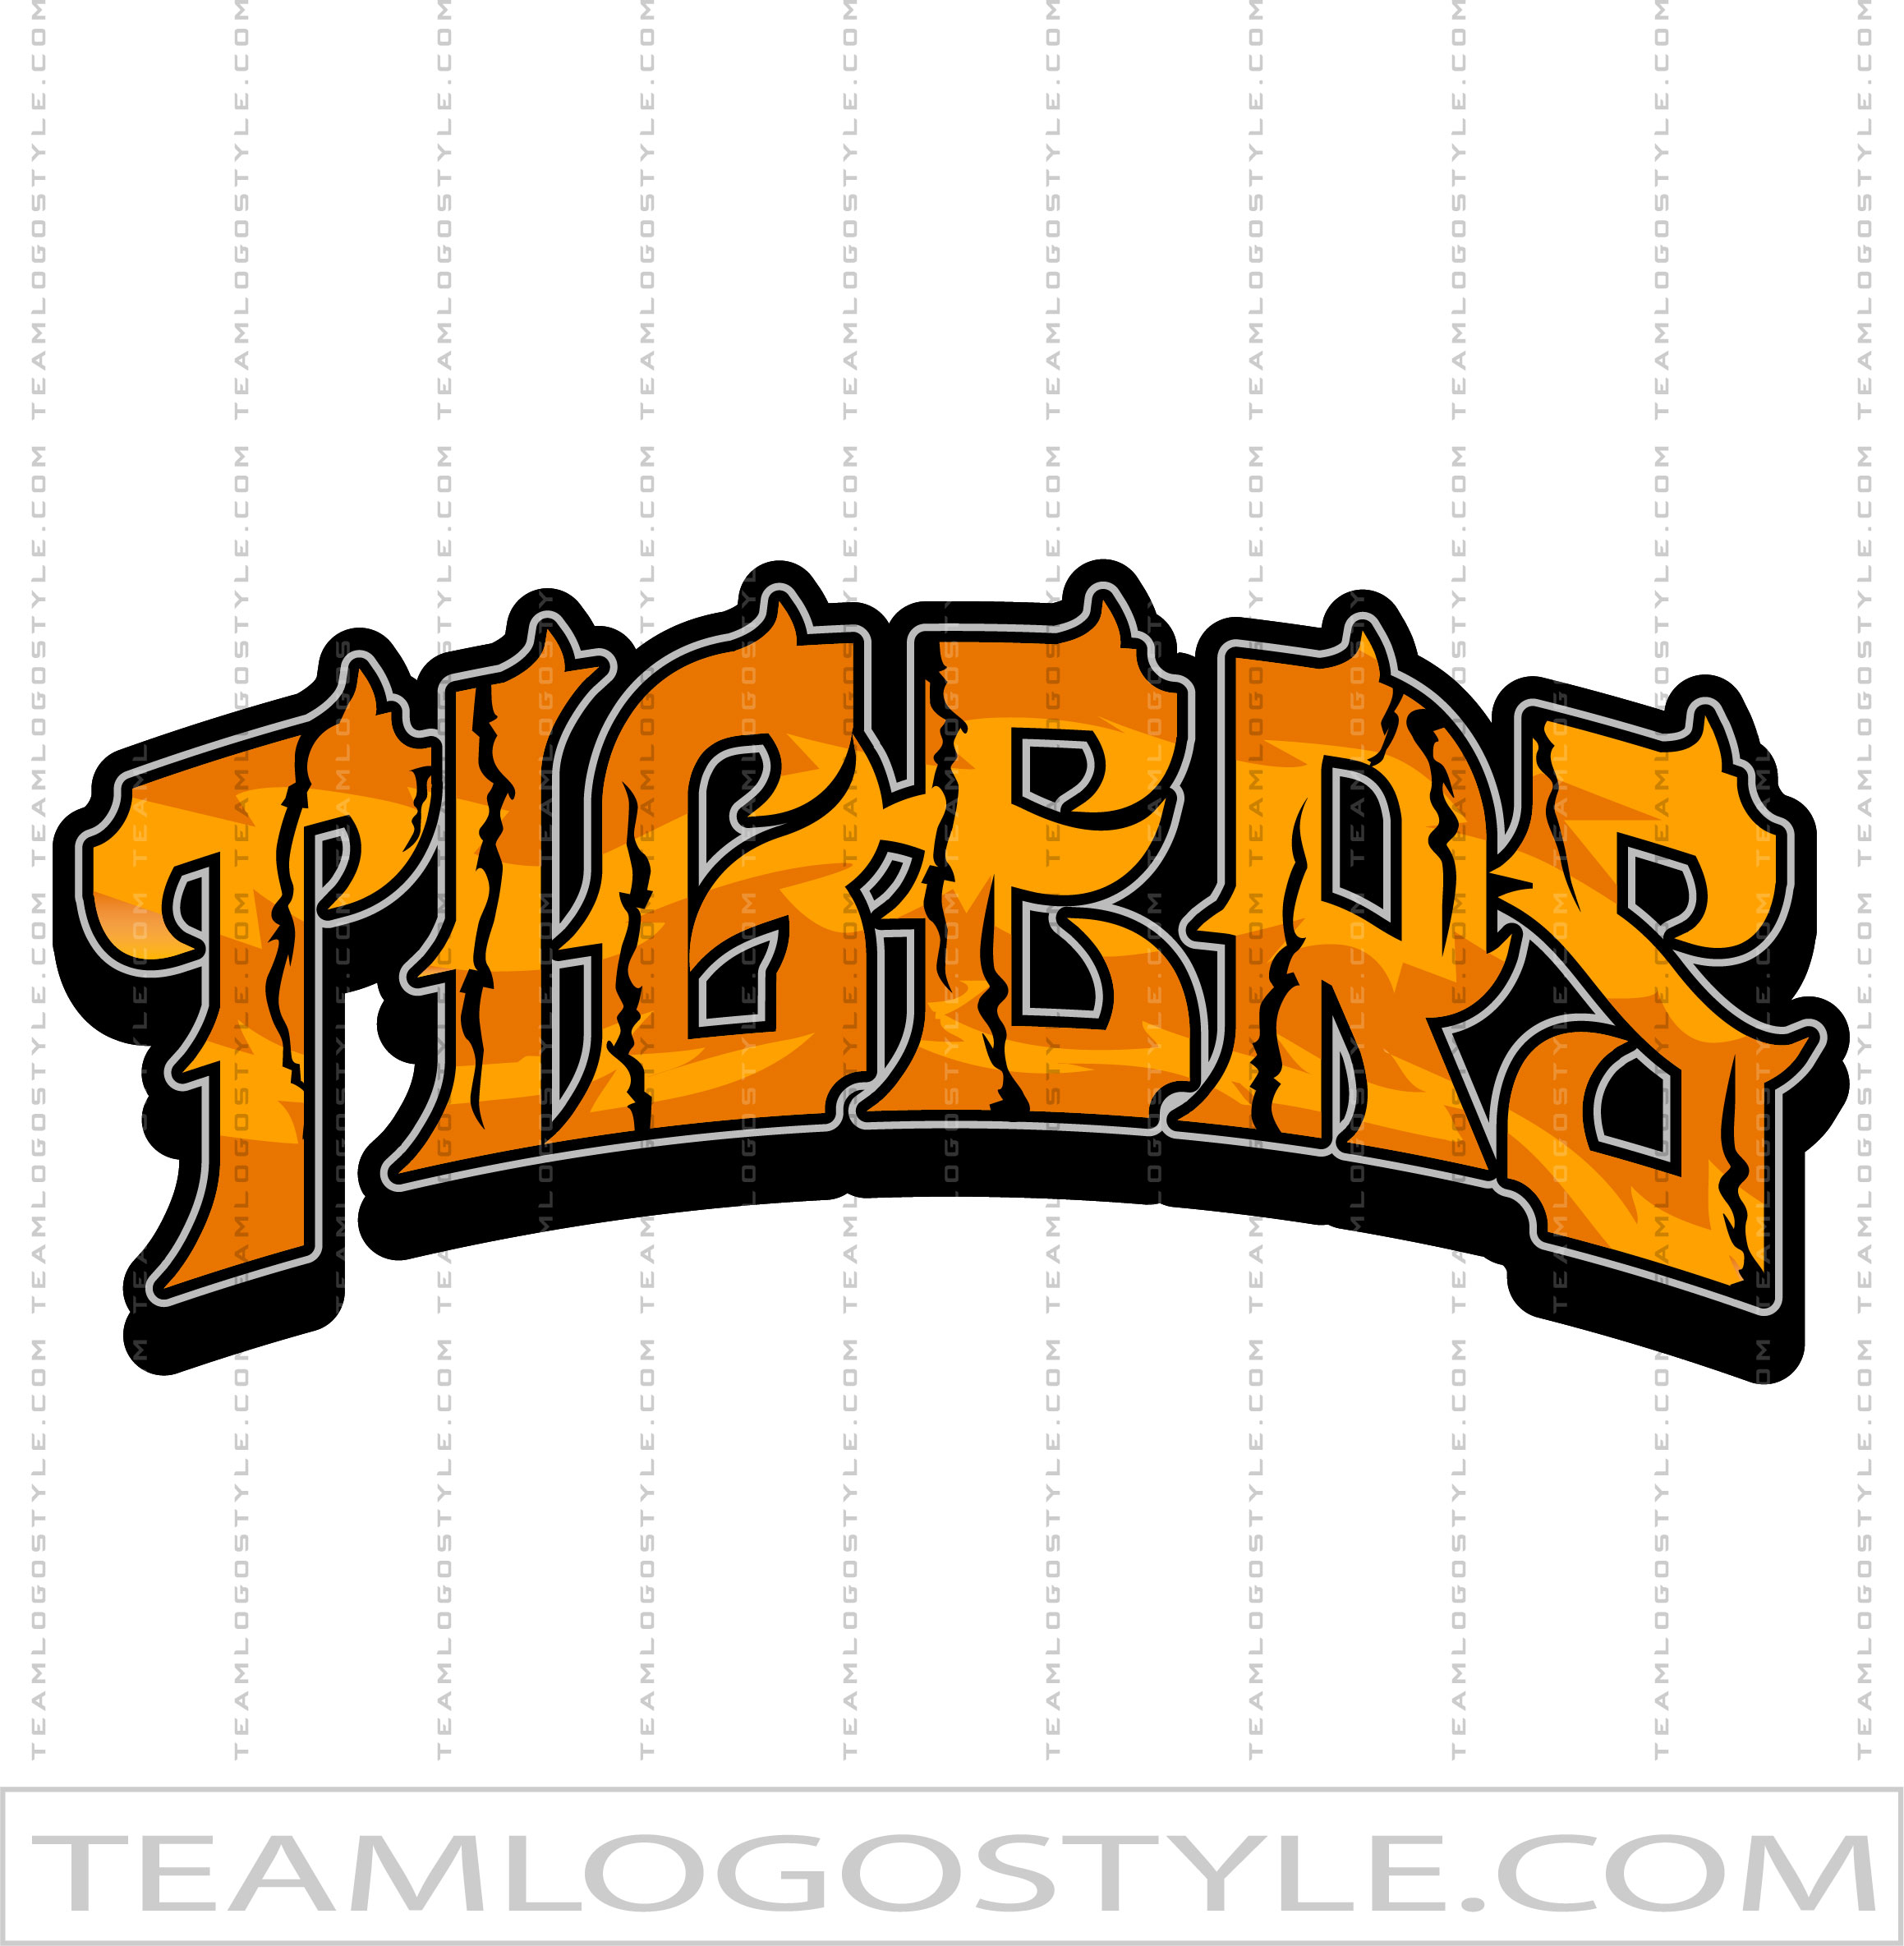 Tigers Baseball Design Is A Tigers Mascot Design Template That Includes  Team Text And A Stylized Baseball Graphic In The Background. Great For Team  Or School T-shirts, Promotions And Advertising. Royalty Free